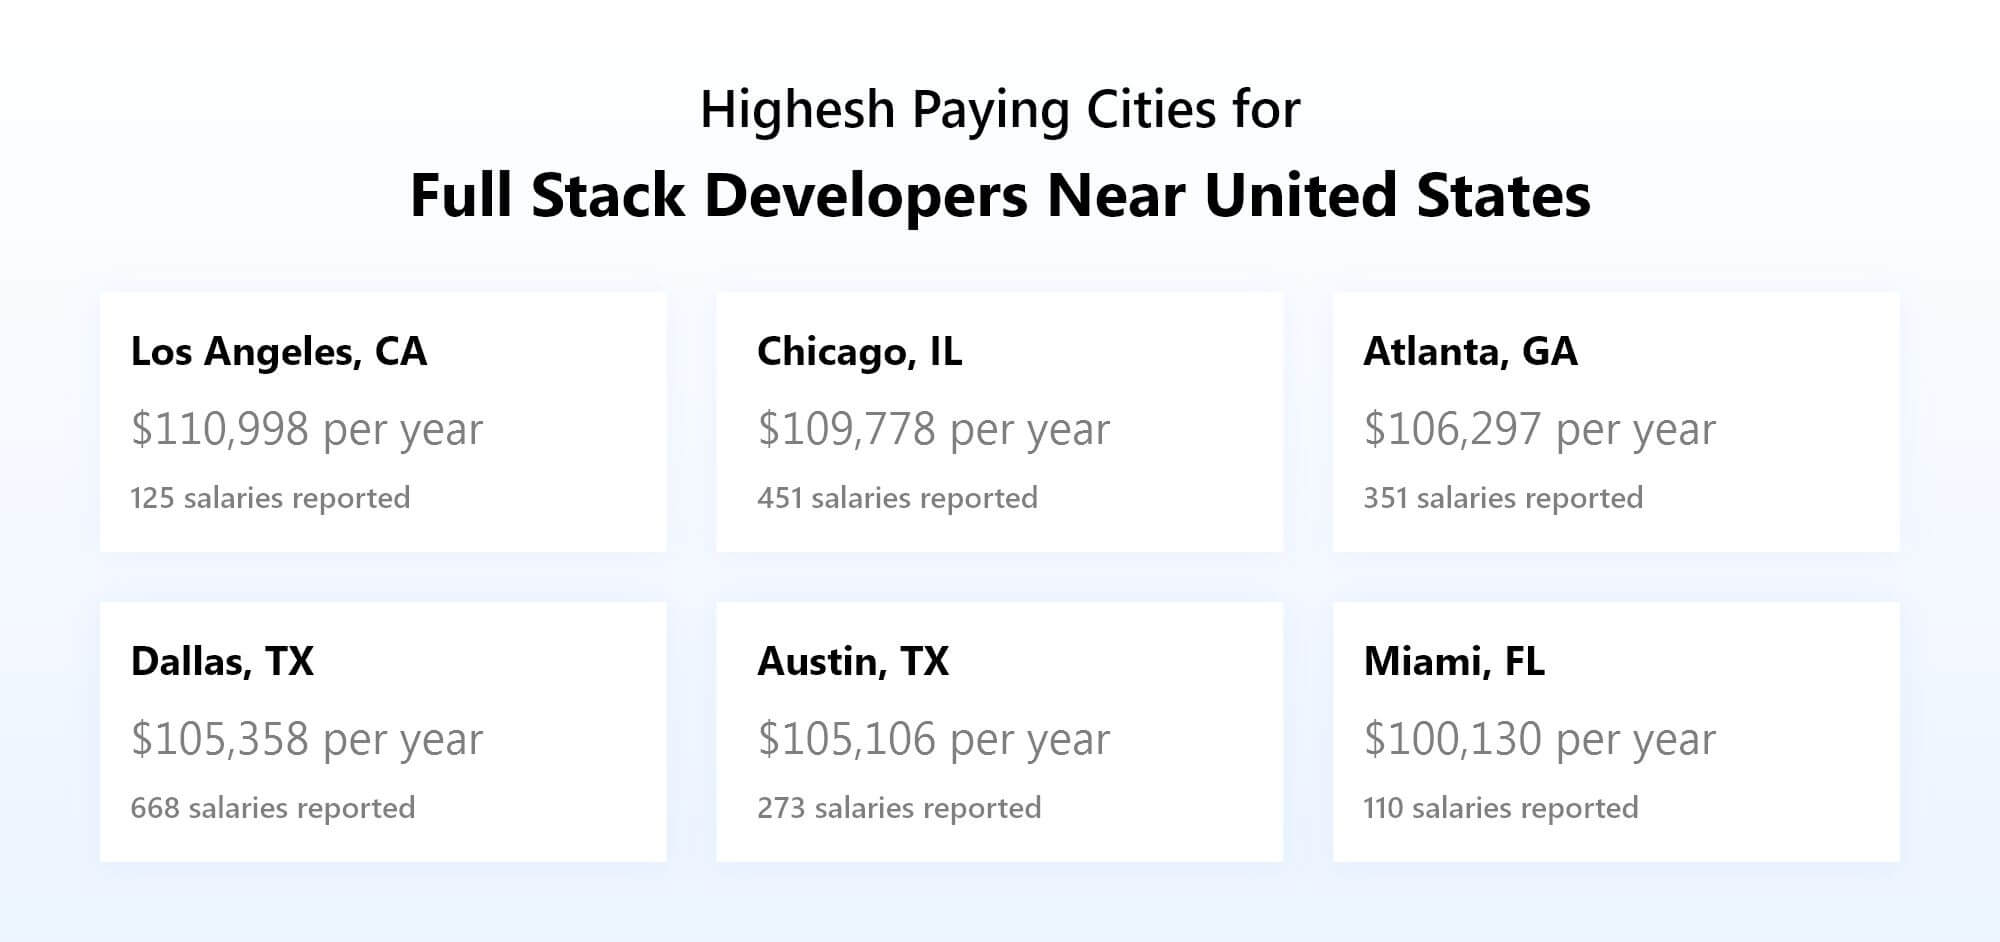 Highest paying cities for full stack developers near United States